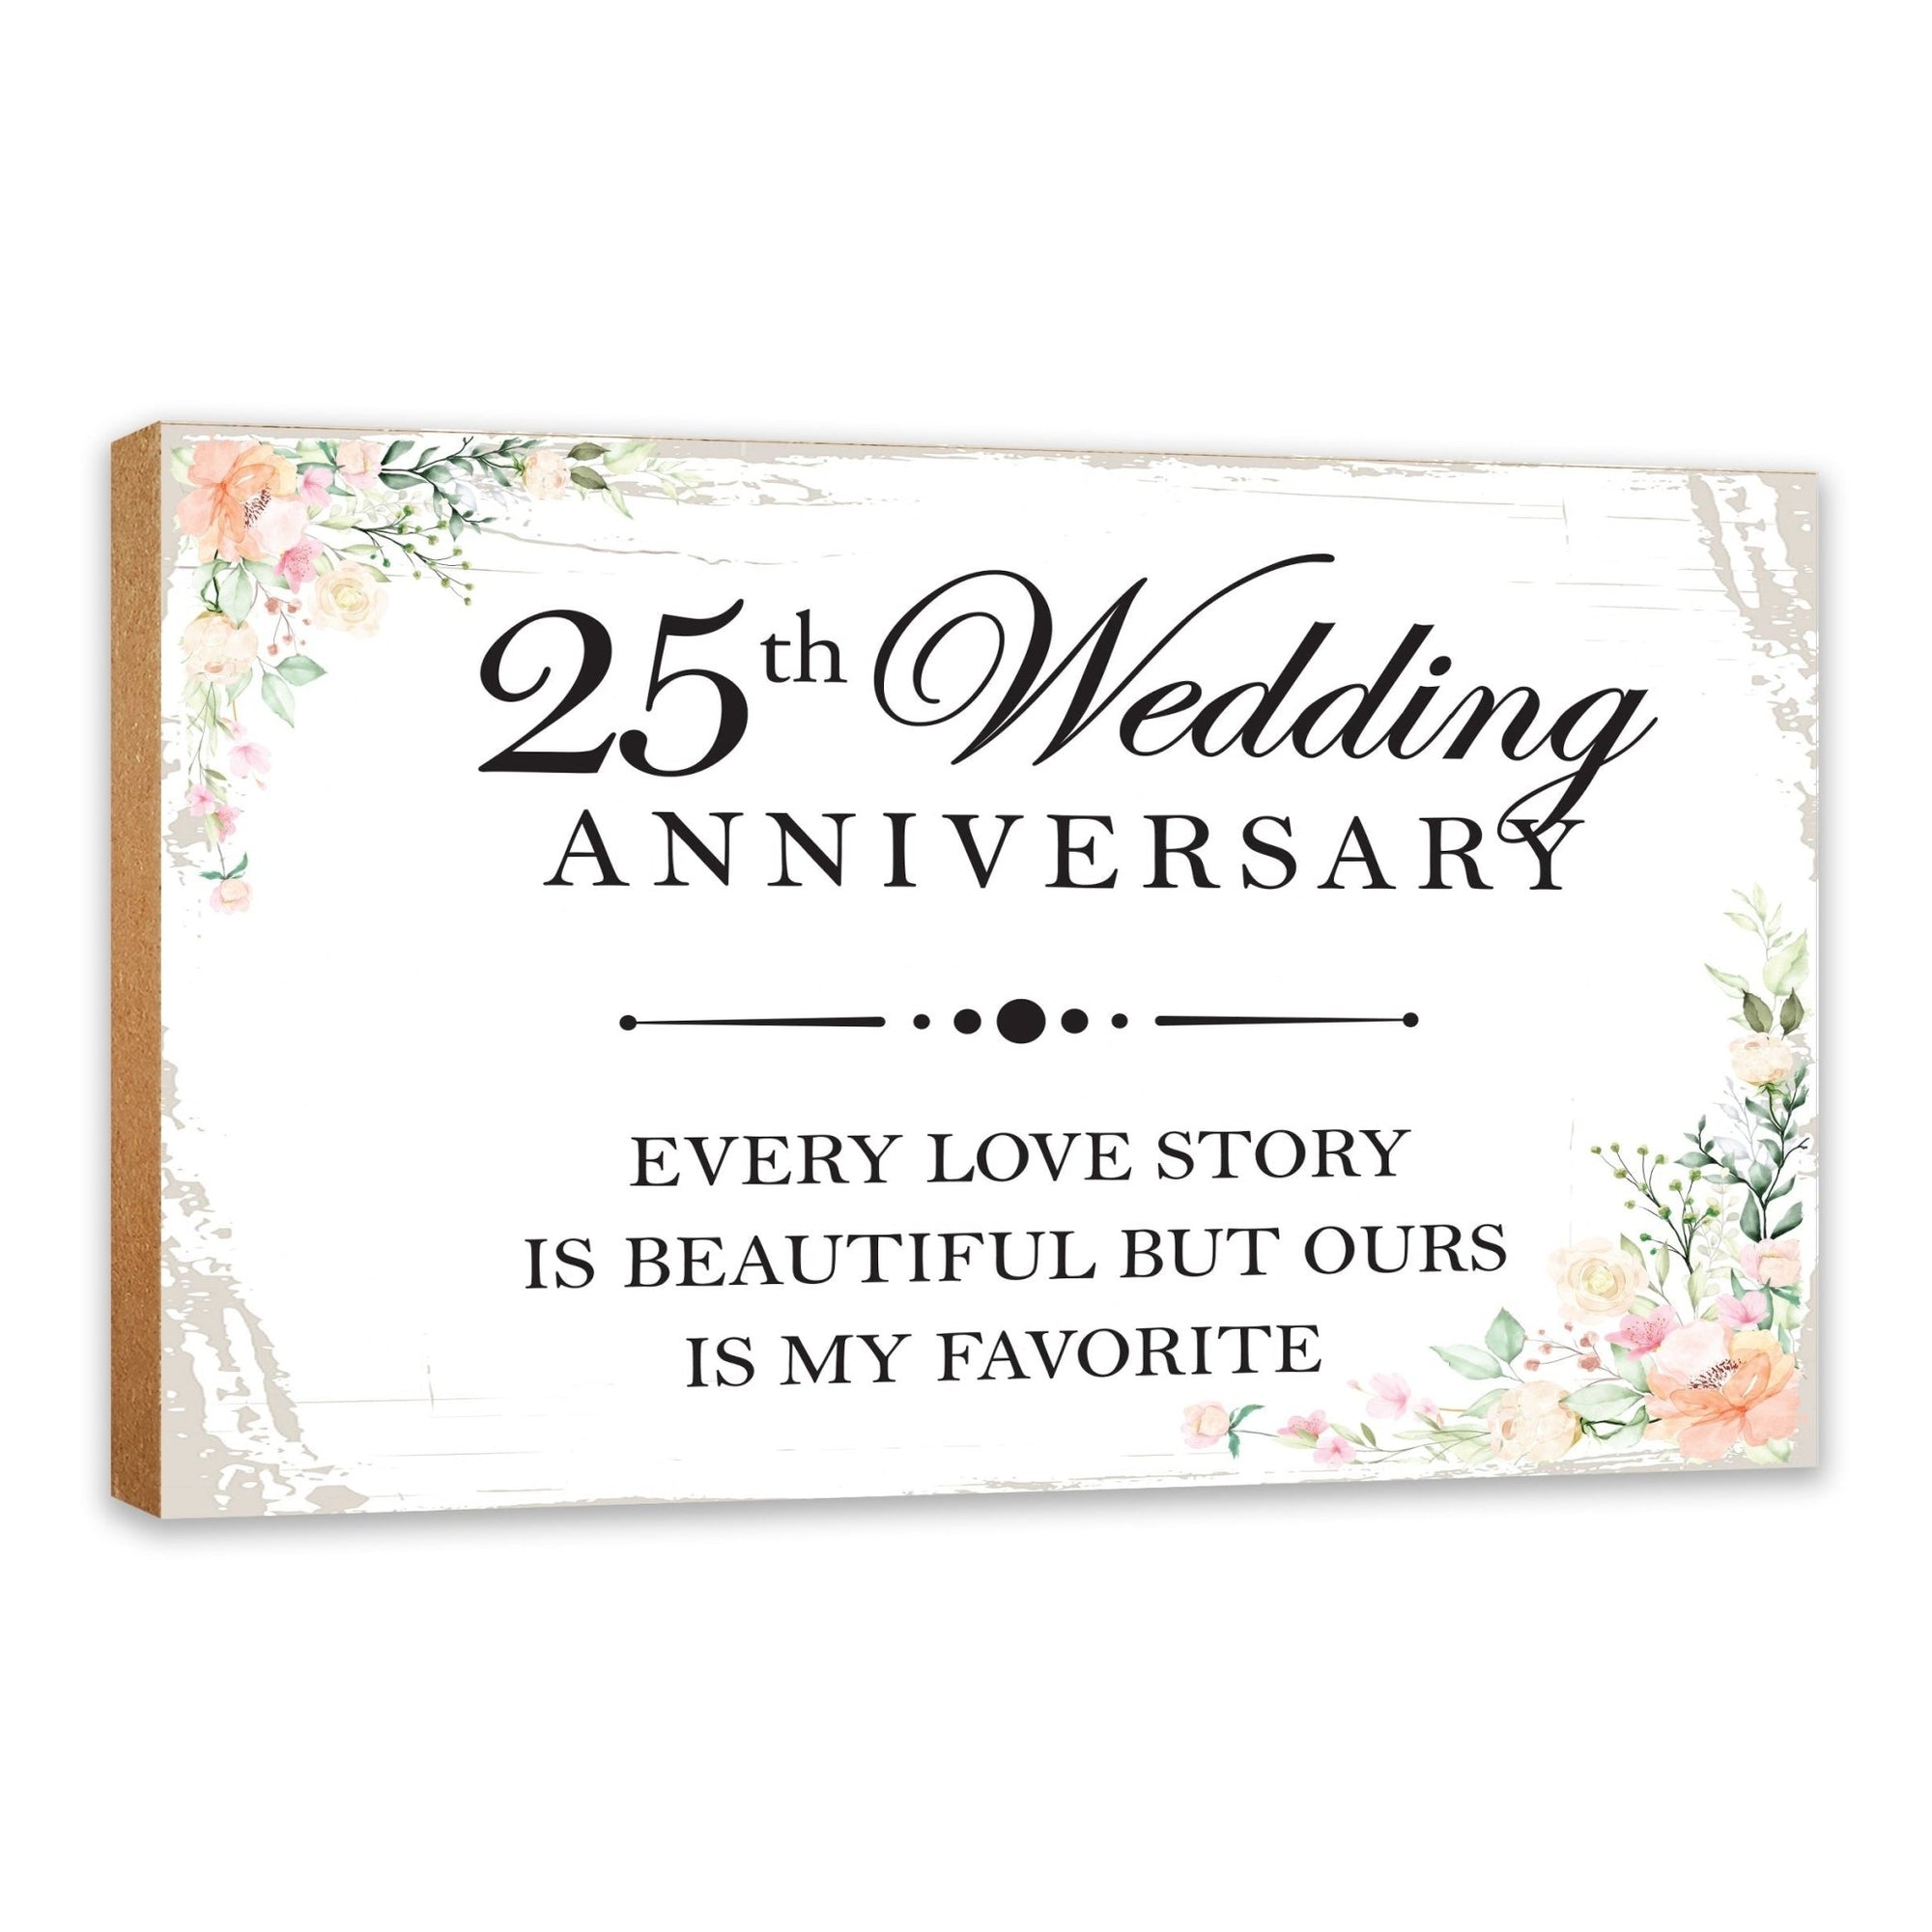 25th Wedding Anniversary Unique Shelf Decor and Tabletop Signs Gifts for Couples - Every Love Story - LifeSong Milestones